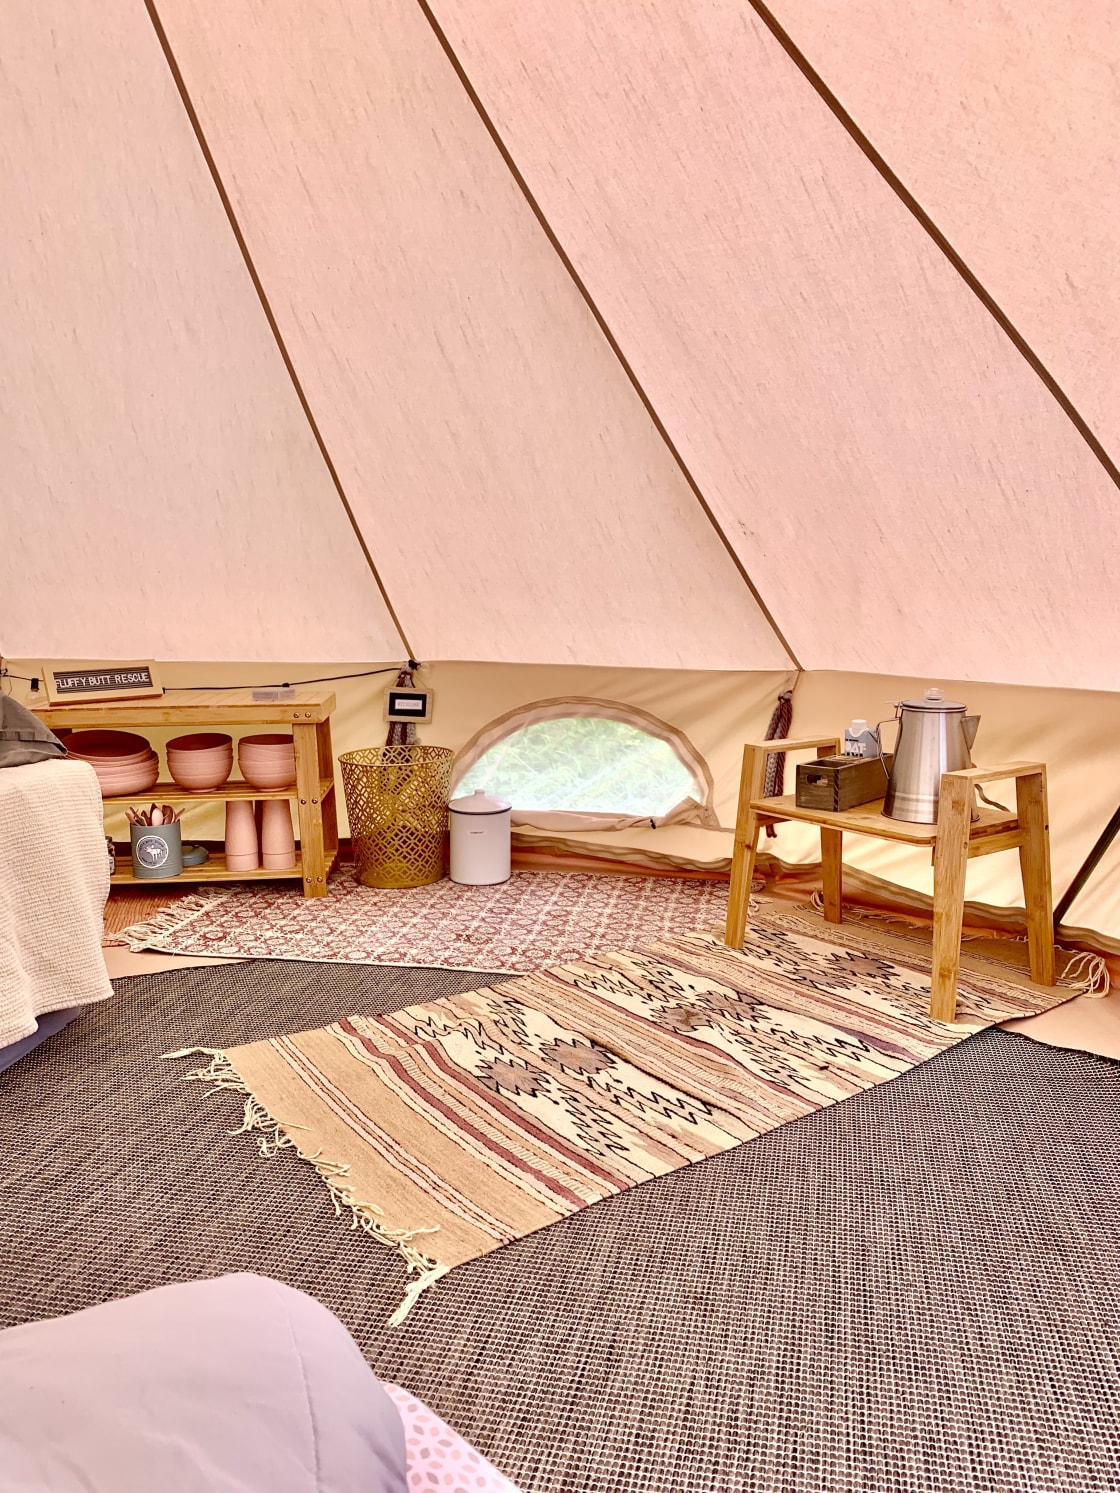 The tent is set up with a double-size bed and is spacious.  A twin size mat or crib mattress is available to accommodate additional guests.